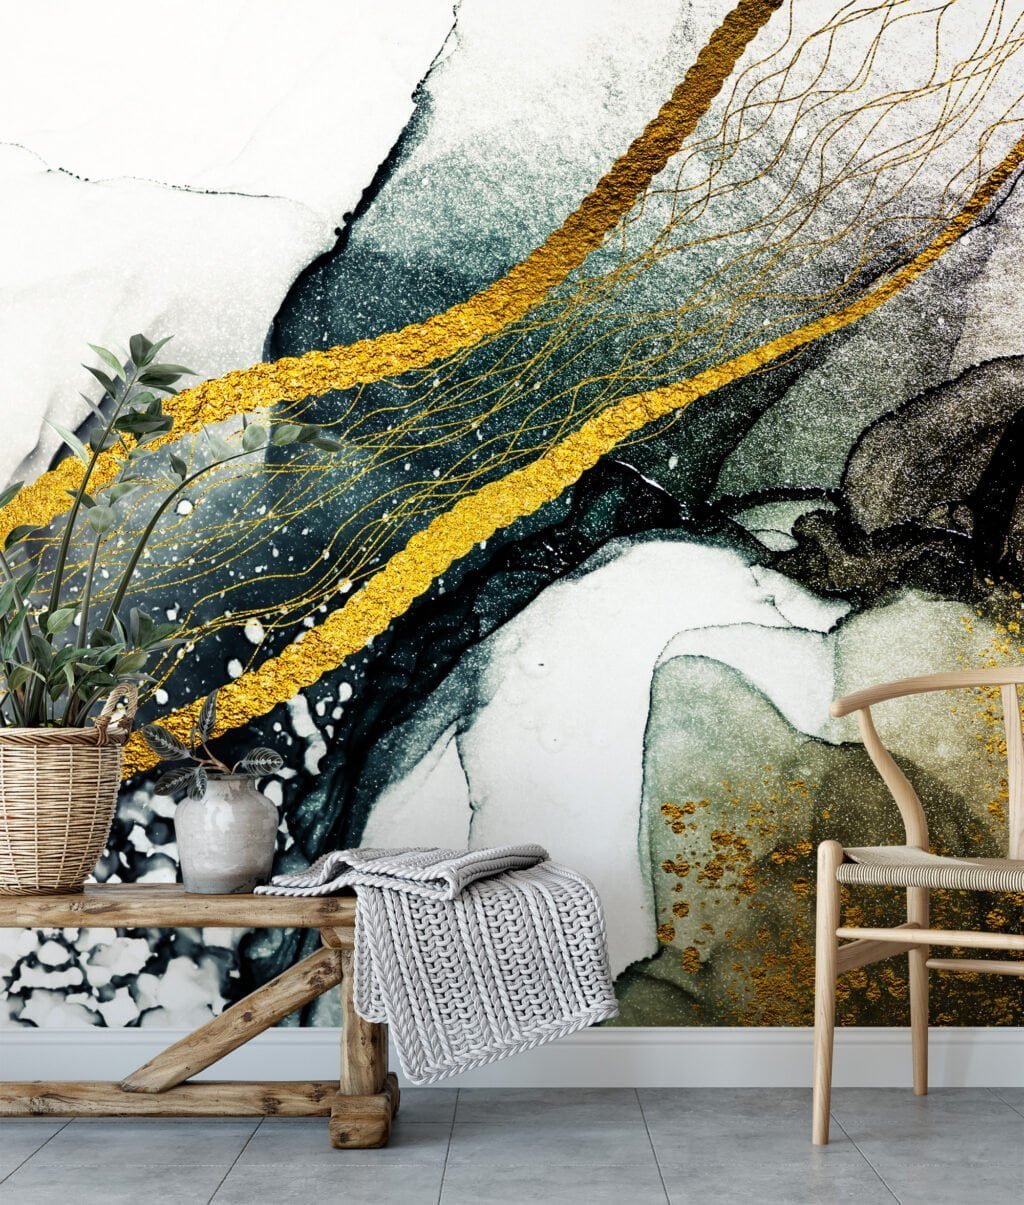 Golden Wave Lines Wall Mural - Self-Adhesive Peel & Stick Wallpaper for Contemporary Home Decor